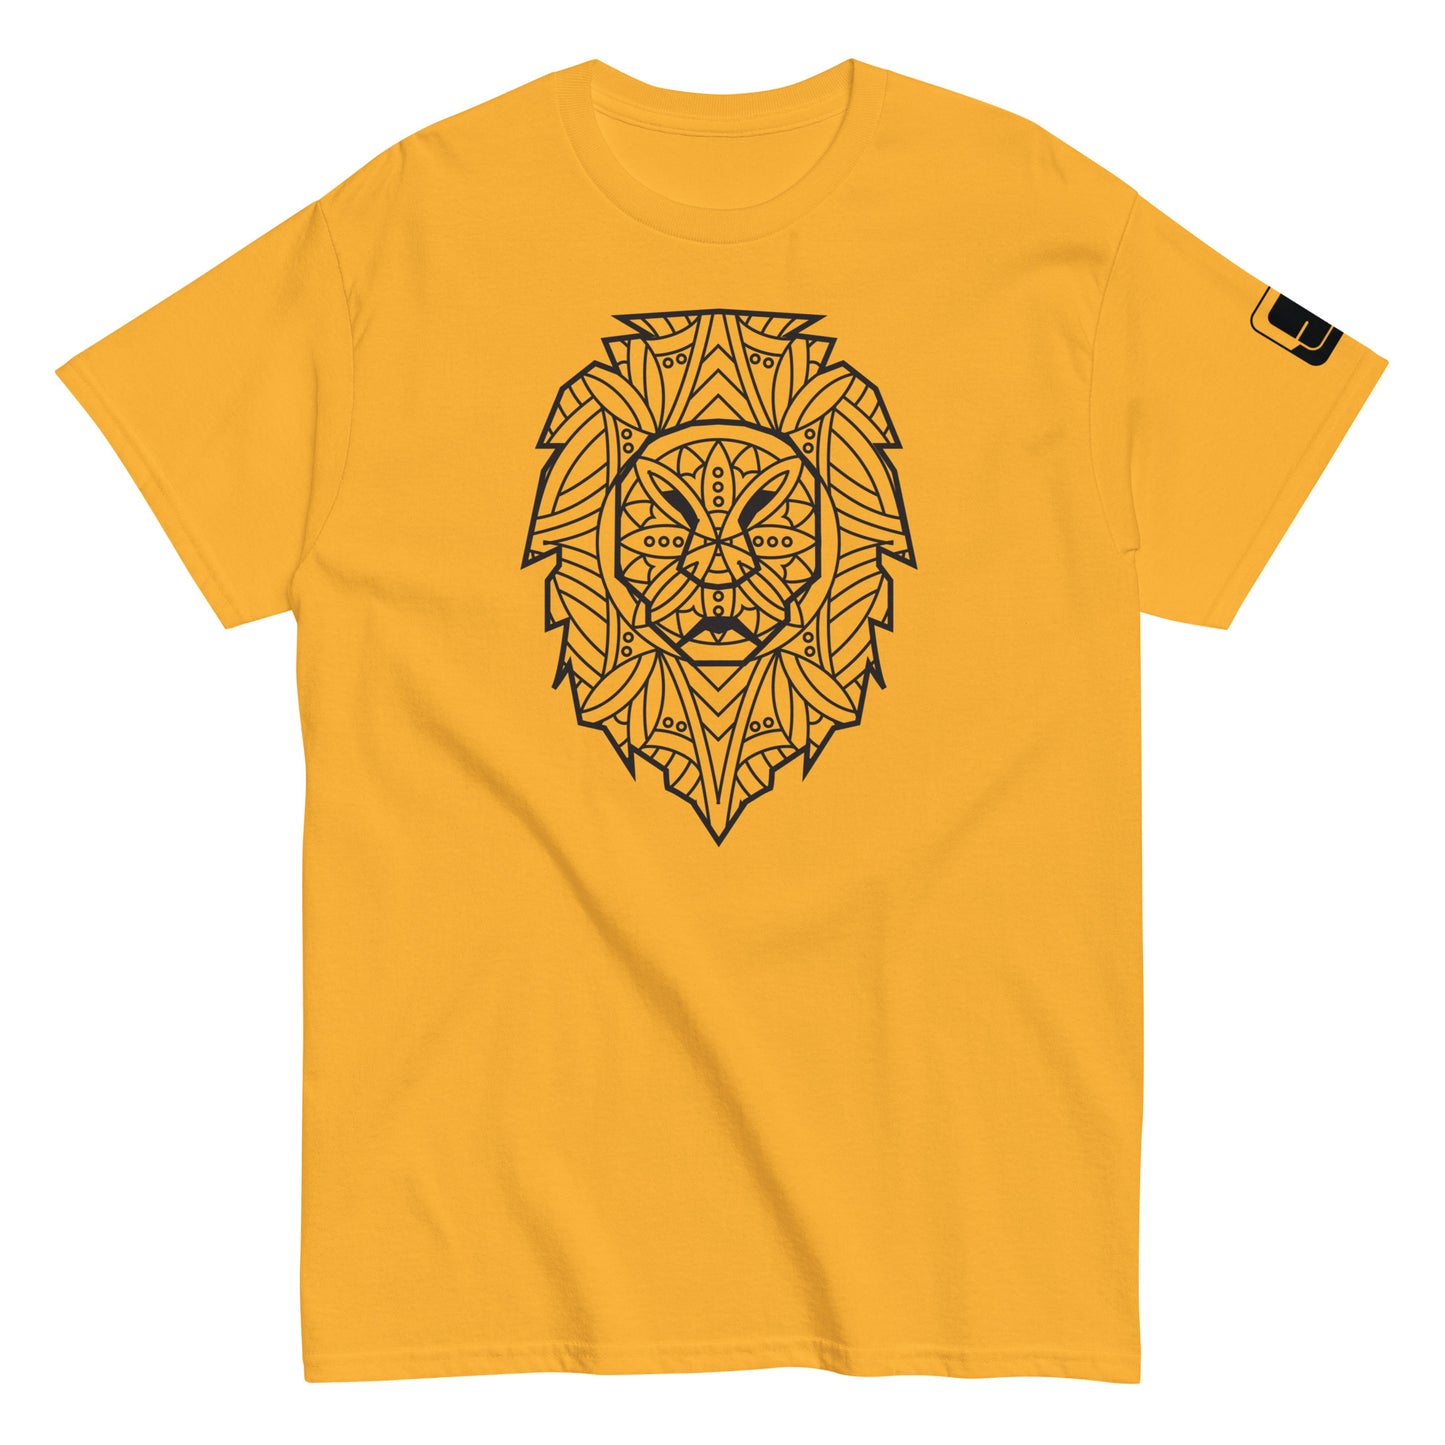 Gold colored t-shirt with a large black geometric lion head design on the chest and a small square logo patch on the sleeve, against a white background.